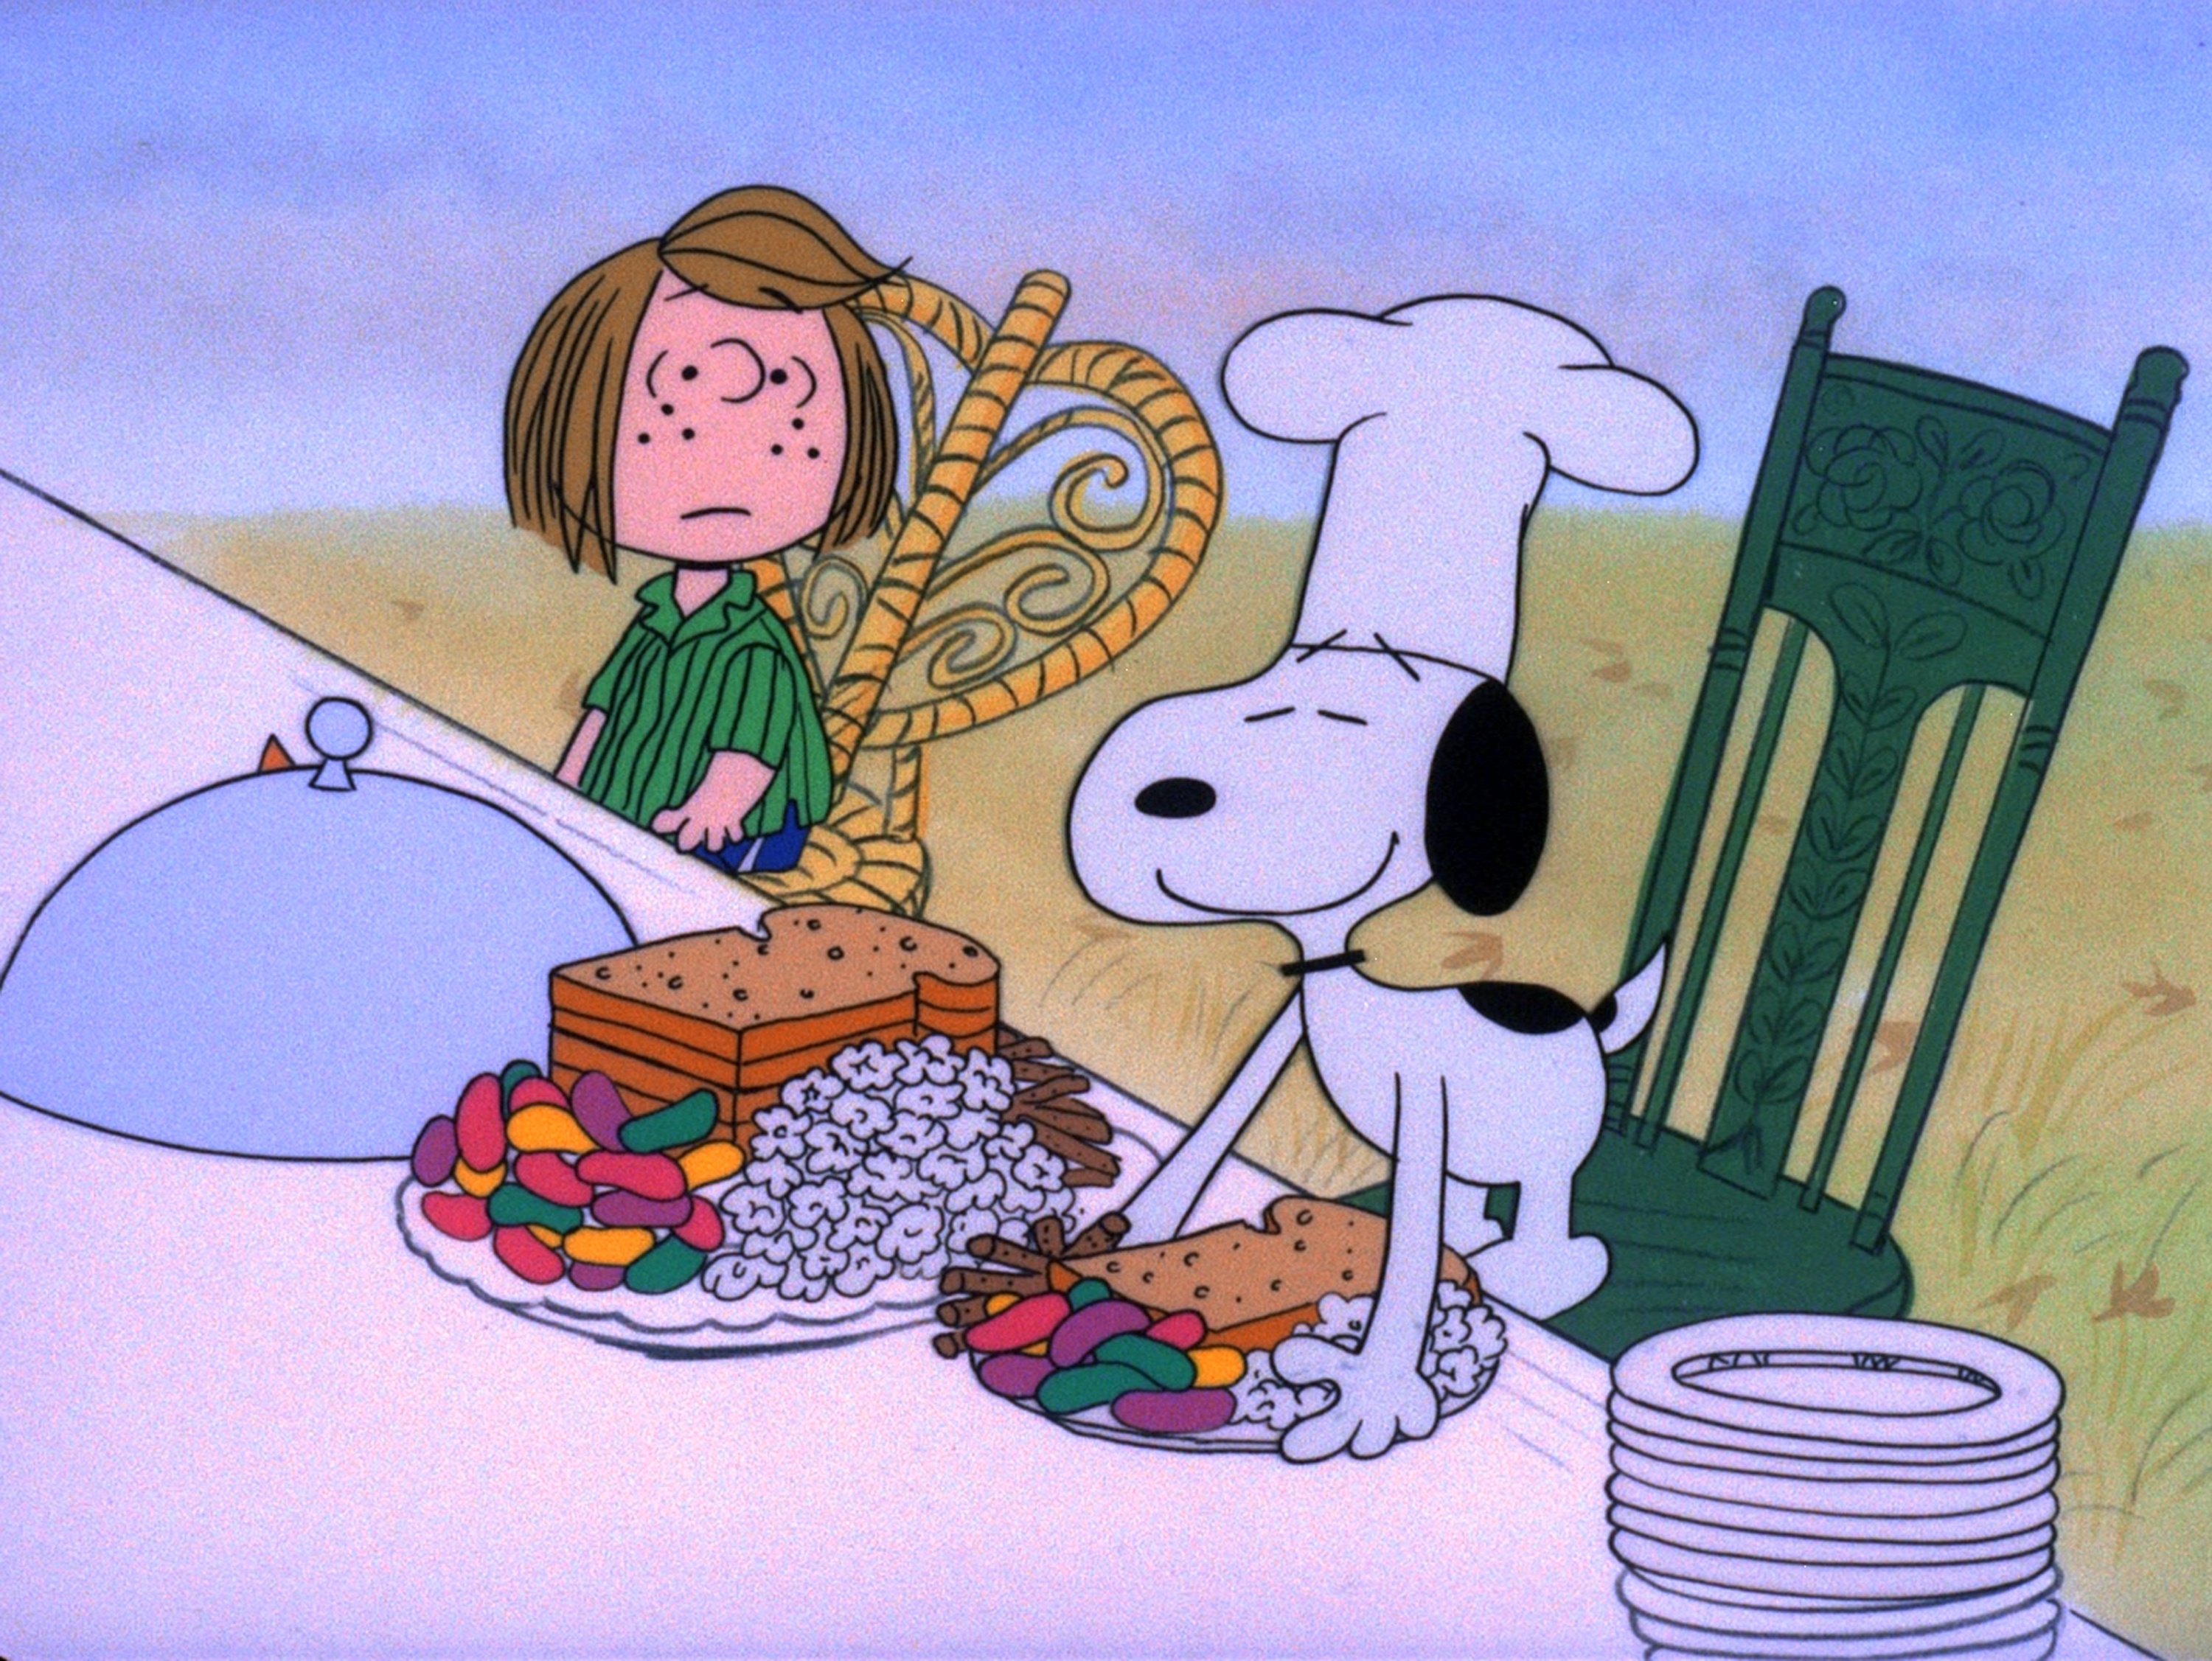 Peppermint Patty looks at Snoopy serving meal in 'A Charlie Brown Thanksgiving'